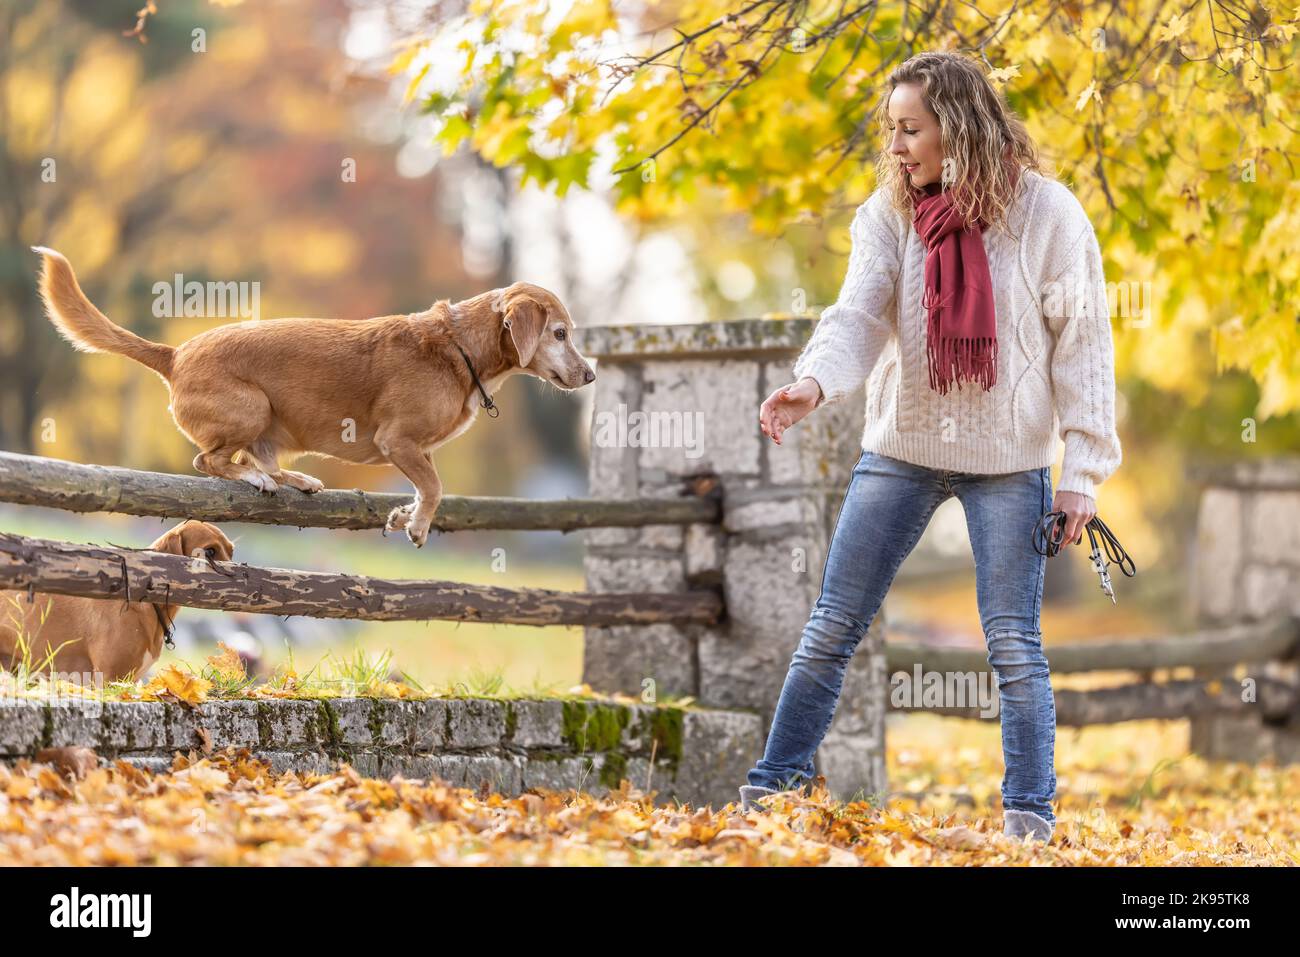 A dog trainer commands two dogs to jump over wooden barriers in nature. Stock Photo